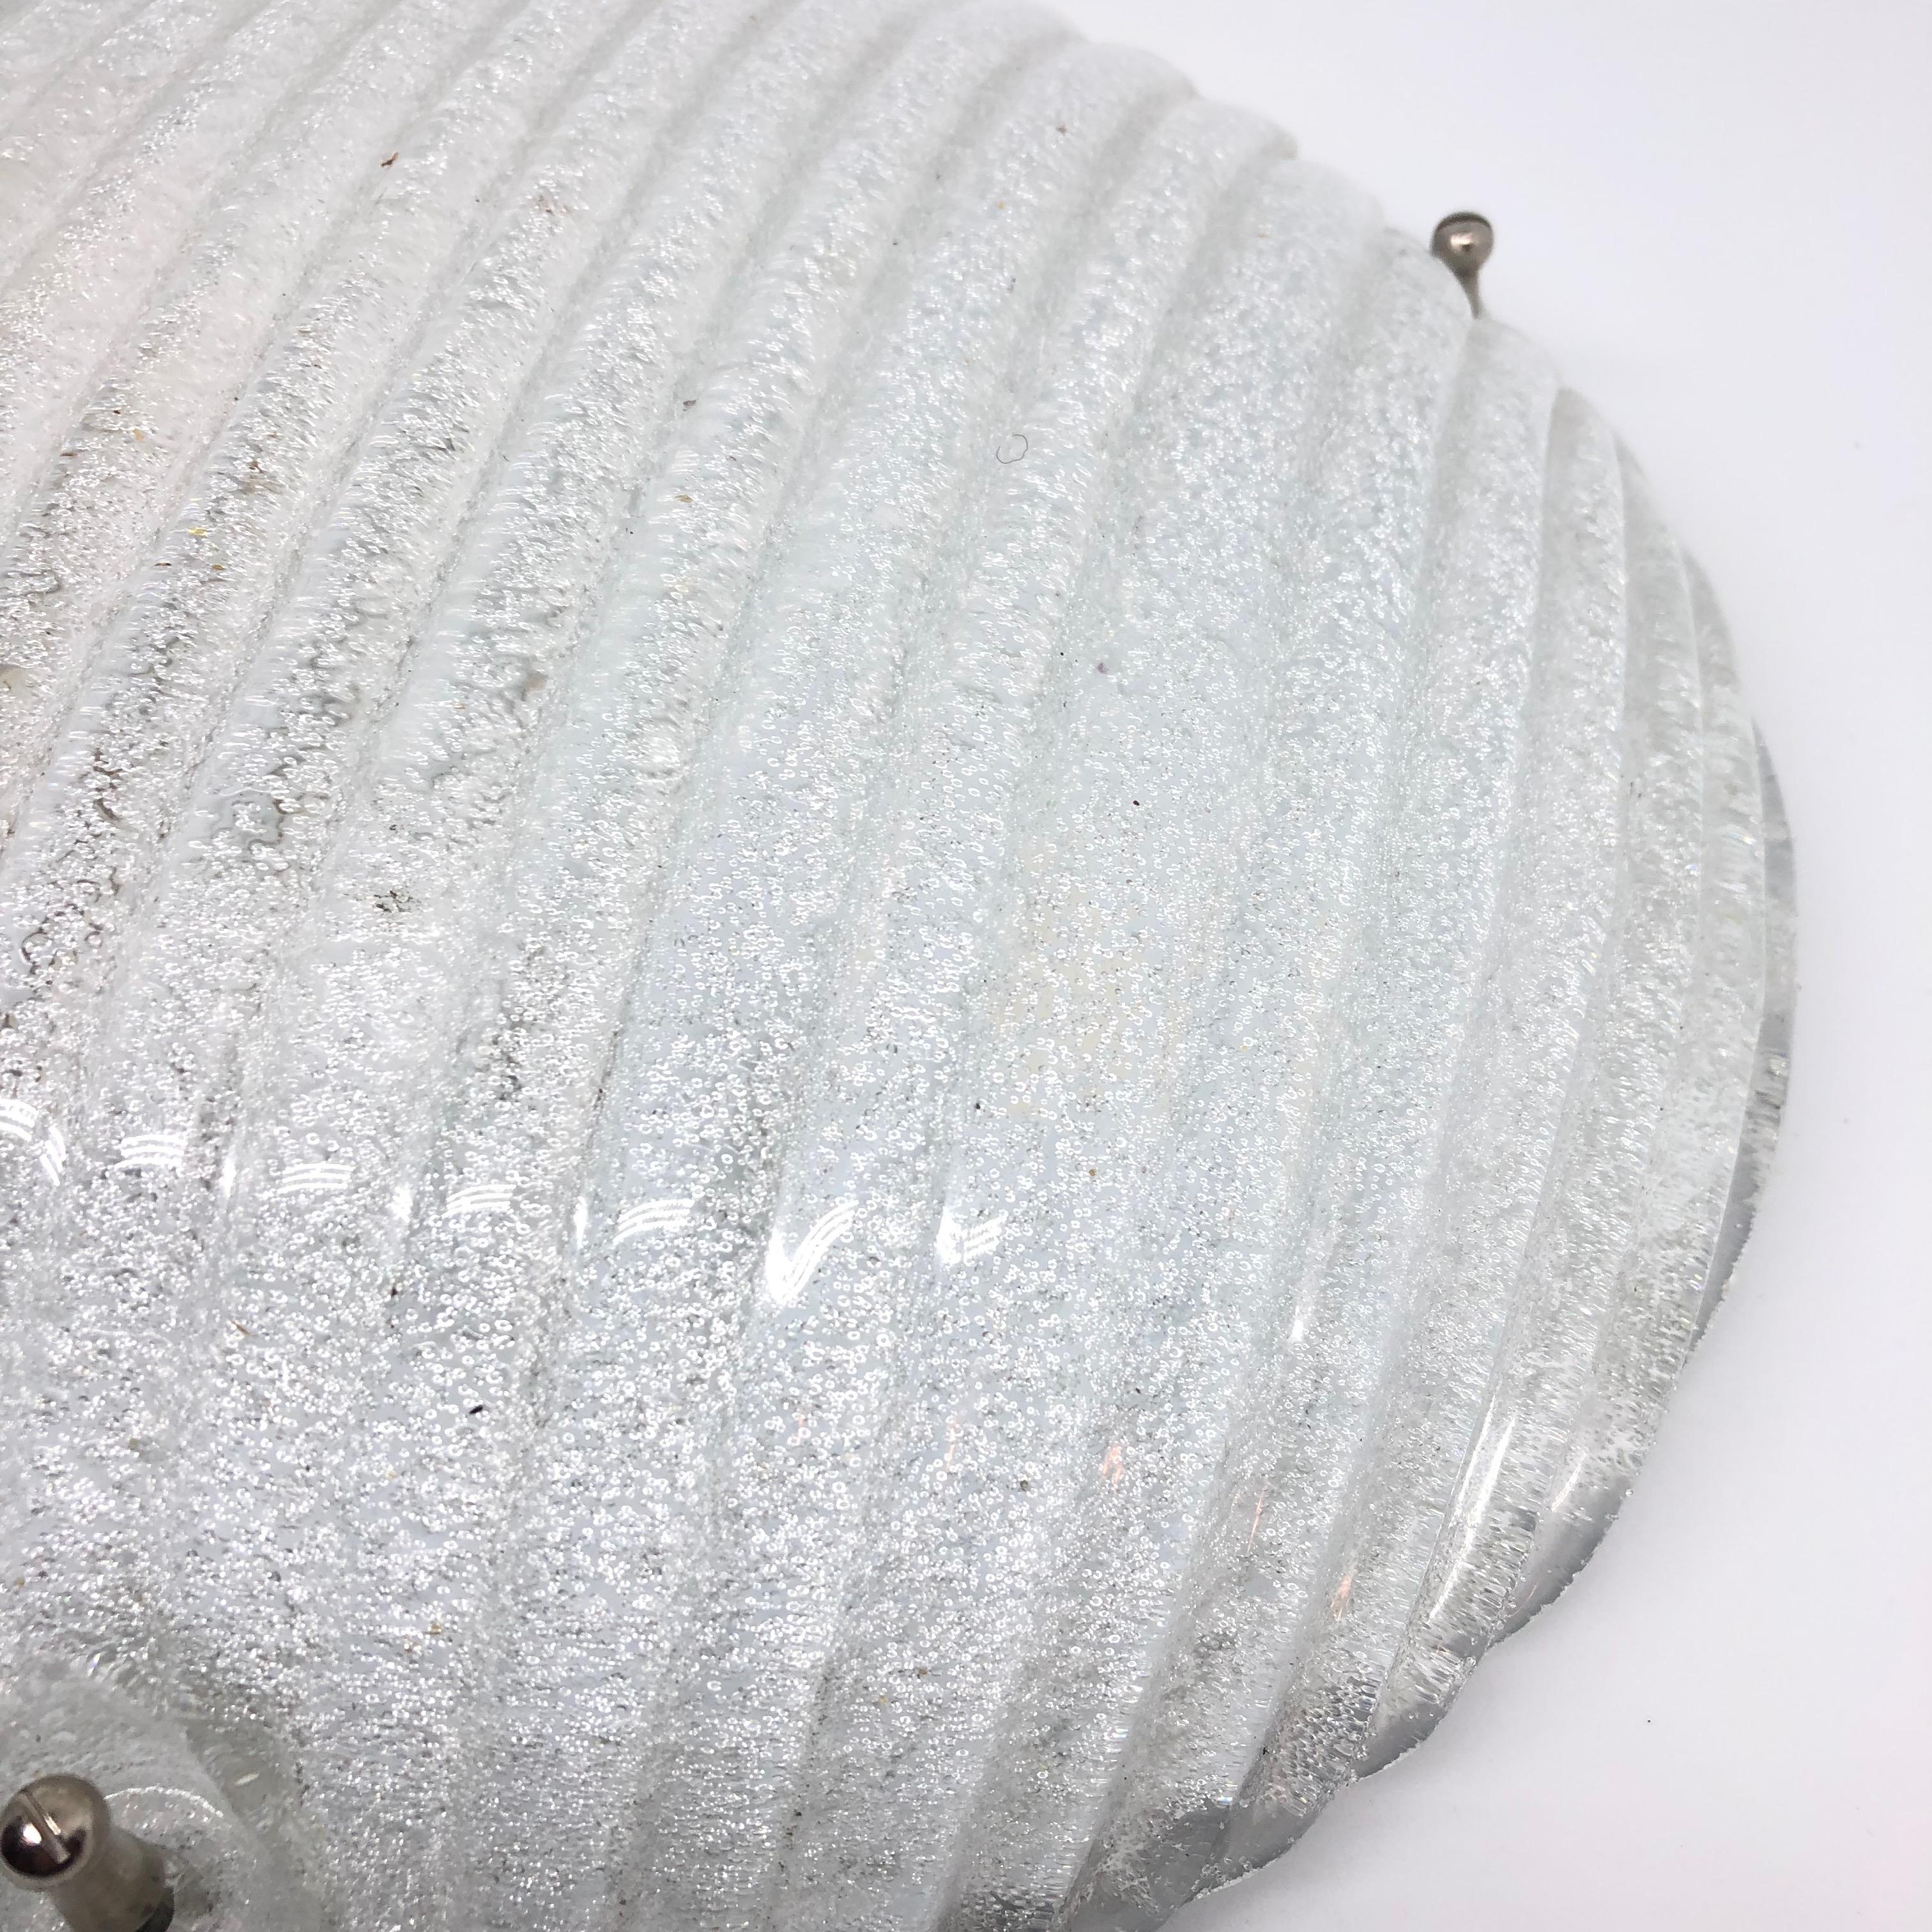 A beautiful flush mount ceiling light. Made in Austria by Eglo Leuchten. Gorgeous textured glass flush mount with metal fixture. The glass has a very cute design. The fixture requires two European E27 / 110 Volt Edison bulbs, up to 60 watts each.